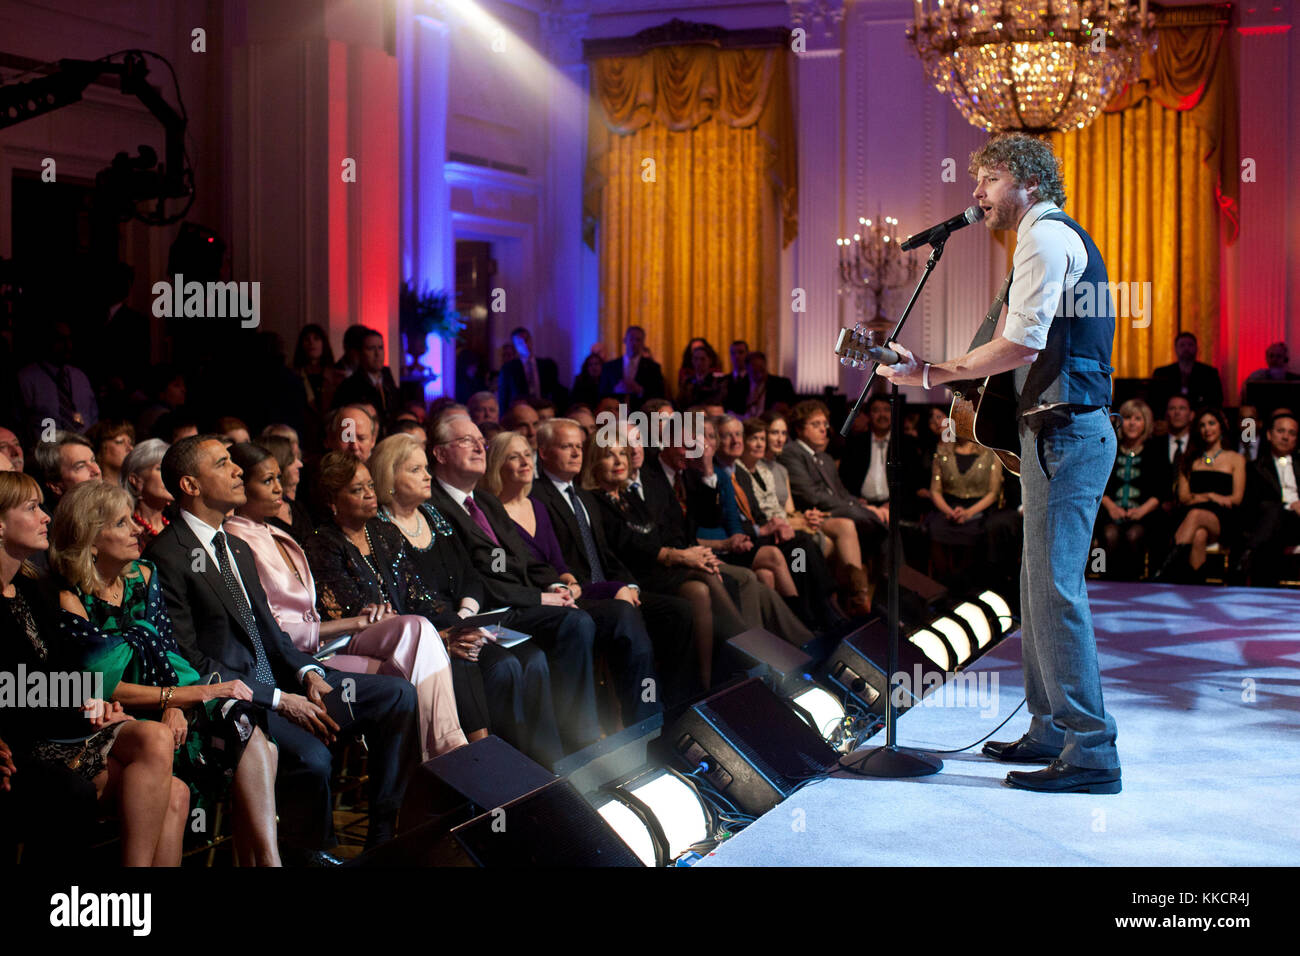 Dierks Bentley performs during the “Country Music: In Performance at the White House” concert in the East Room, Nov. 21, 2011. Stock Photo